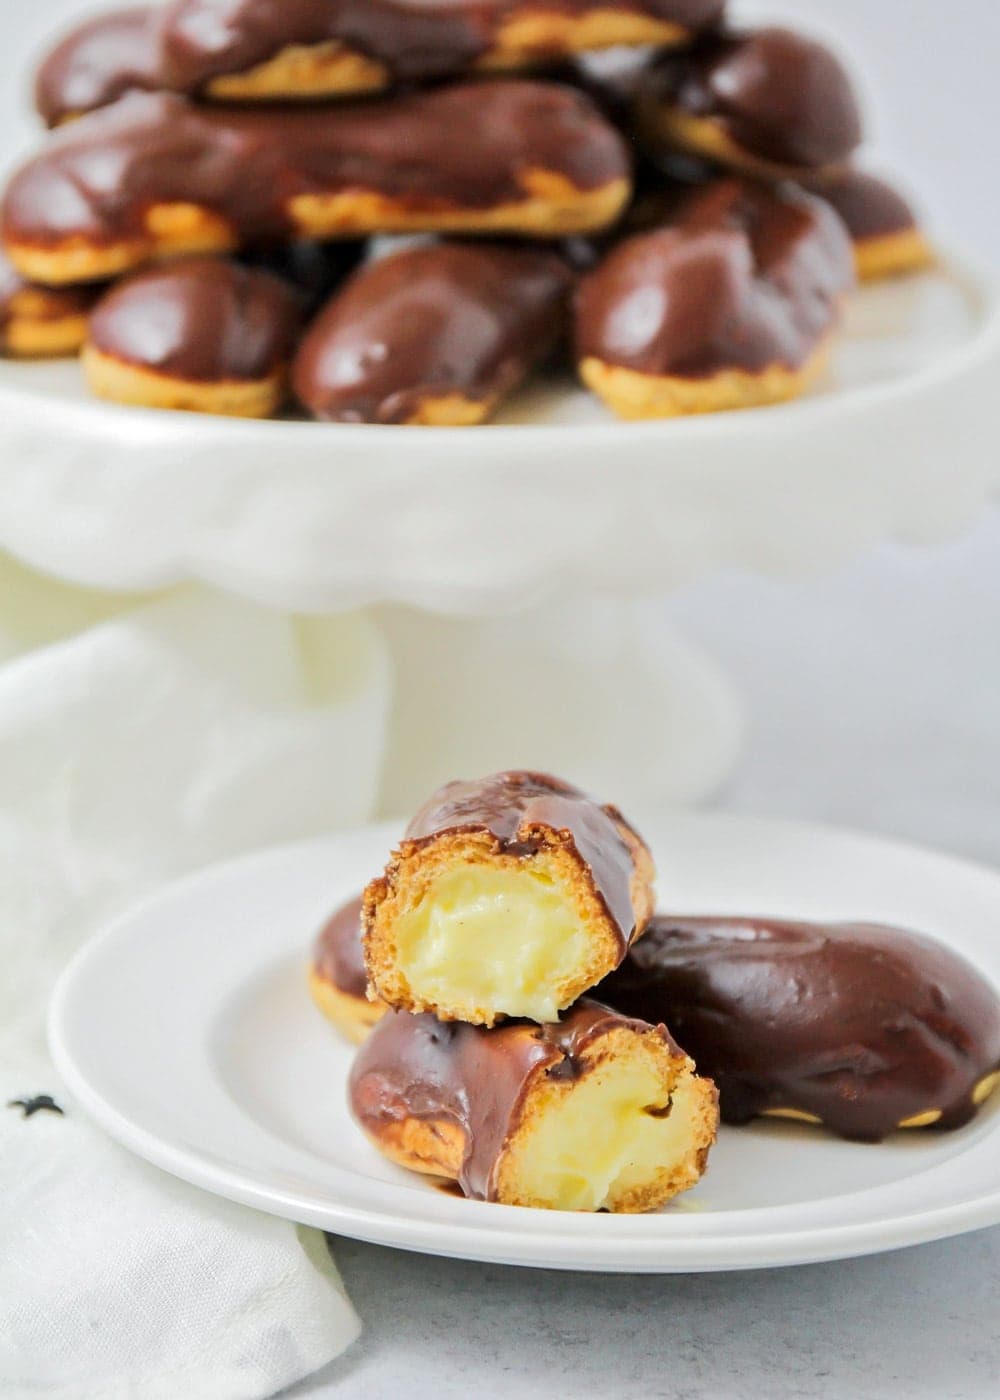 Chocolate eclairs on a white plate